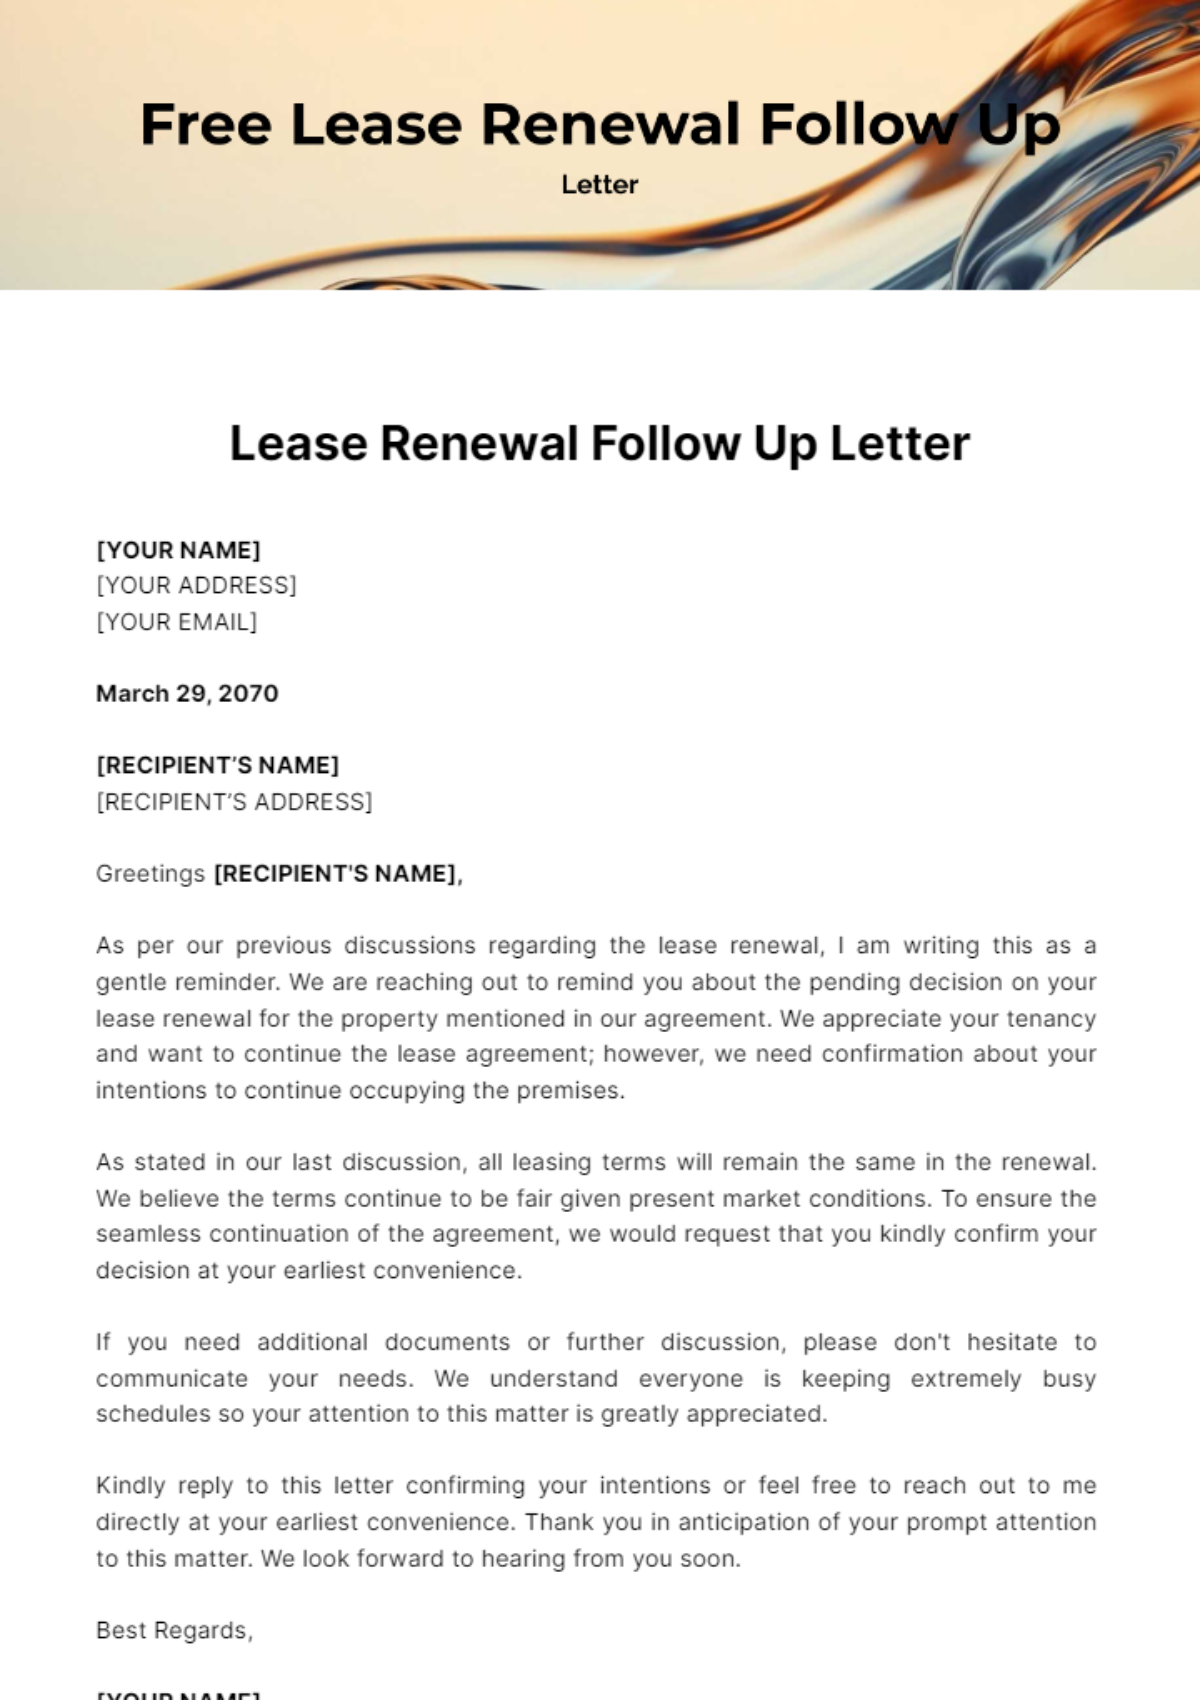 Free Lease Renewal Follow Up Letter Template